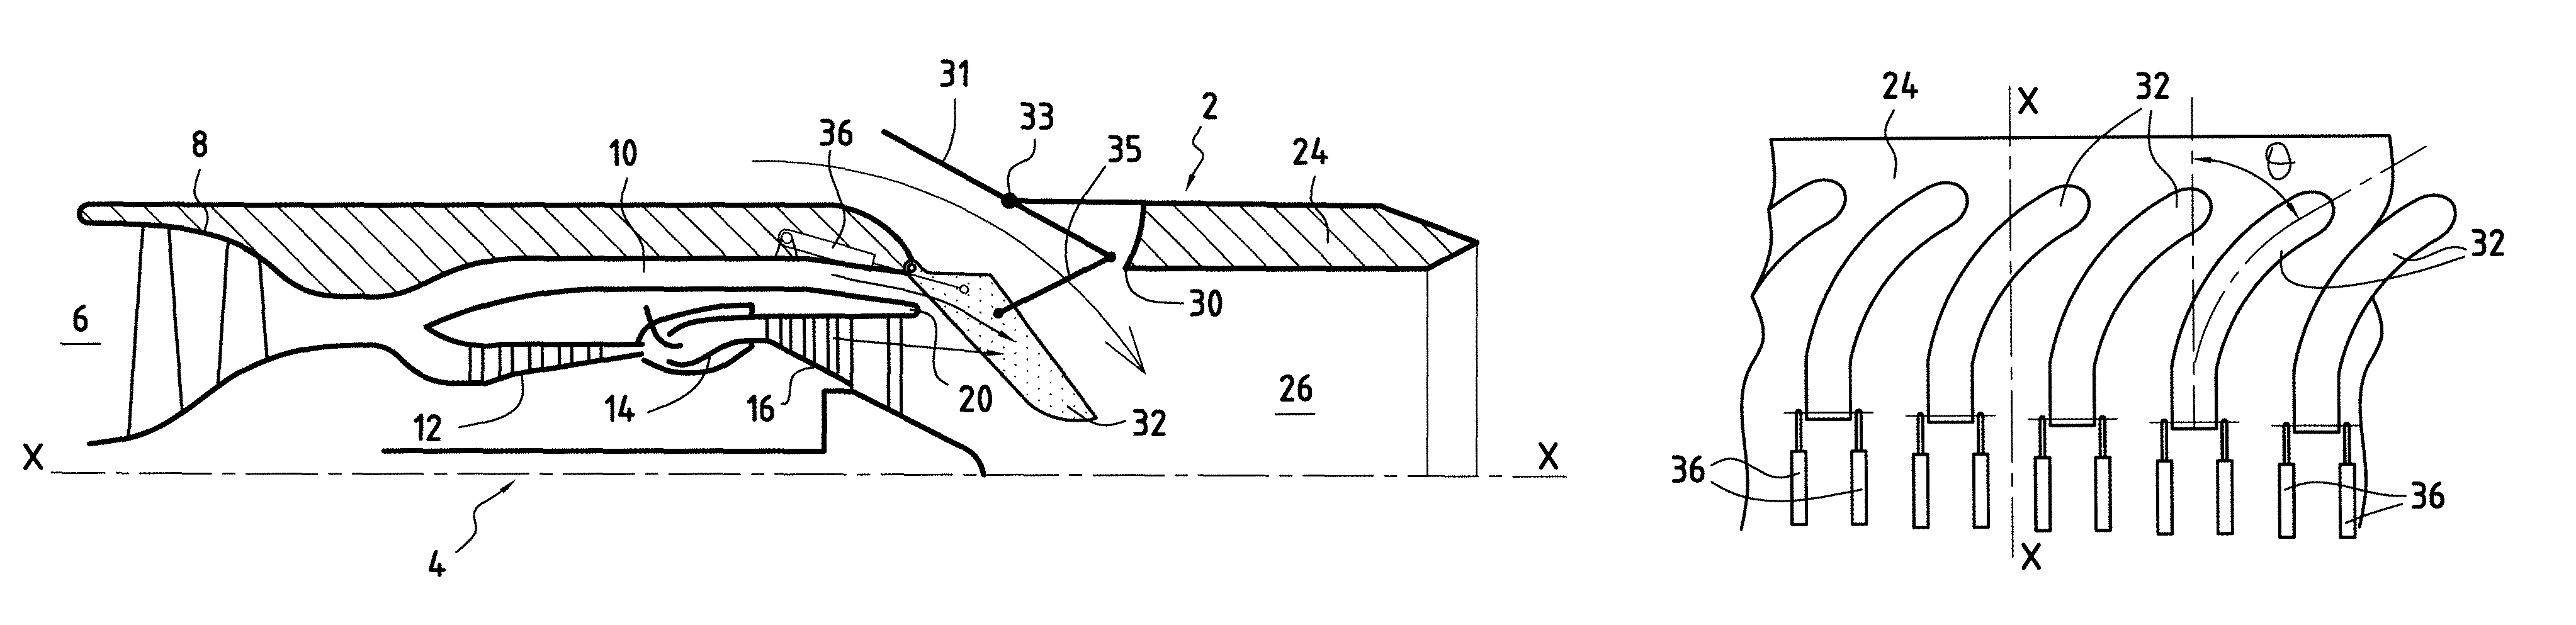 Core exhaust mixer, having a variable area, for turbo-fan jet engines of supersonic aircraft